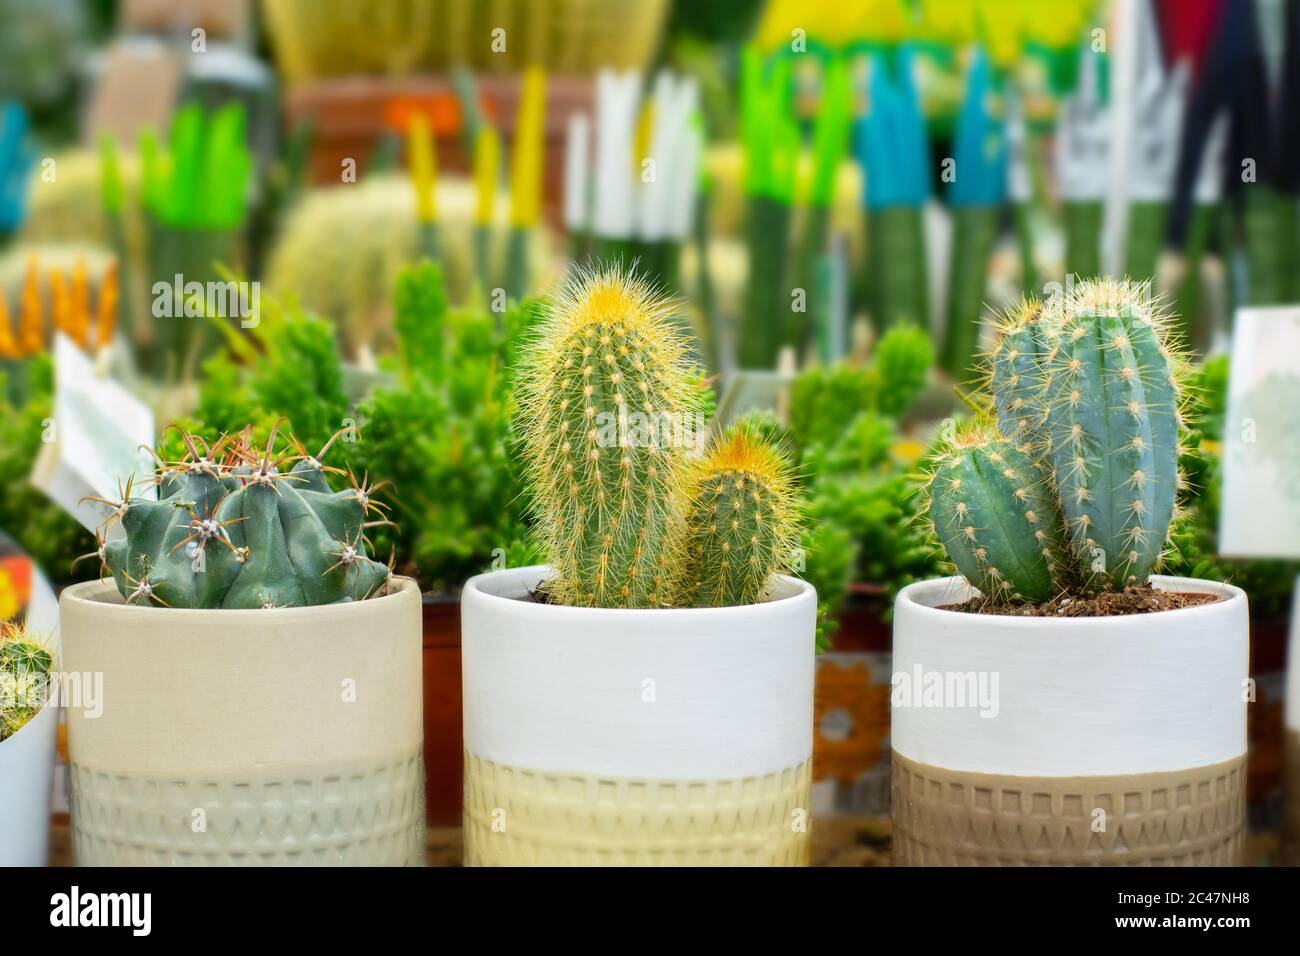 Beautiful natural green cacti in pots. Growing desert cactus plants at home. Small prickly houseplants in white clay pots Stock Photo